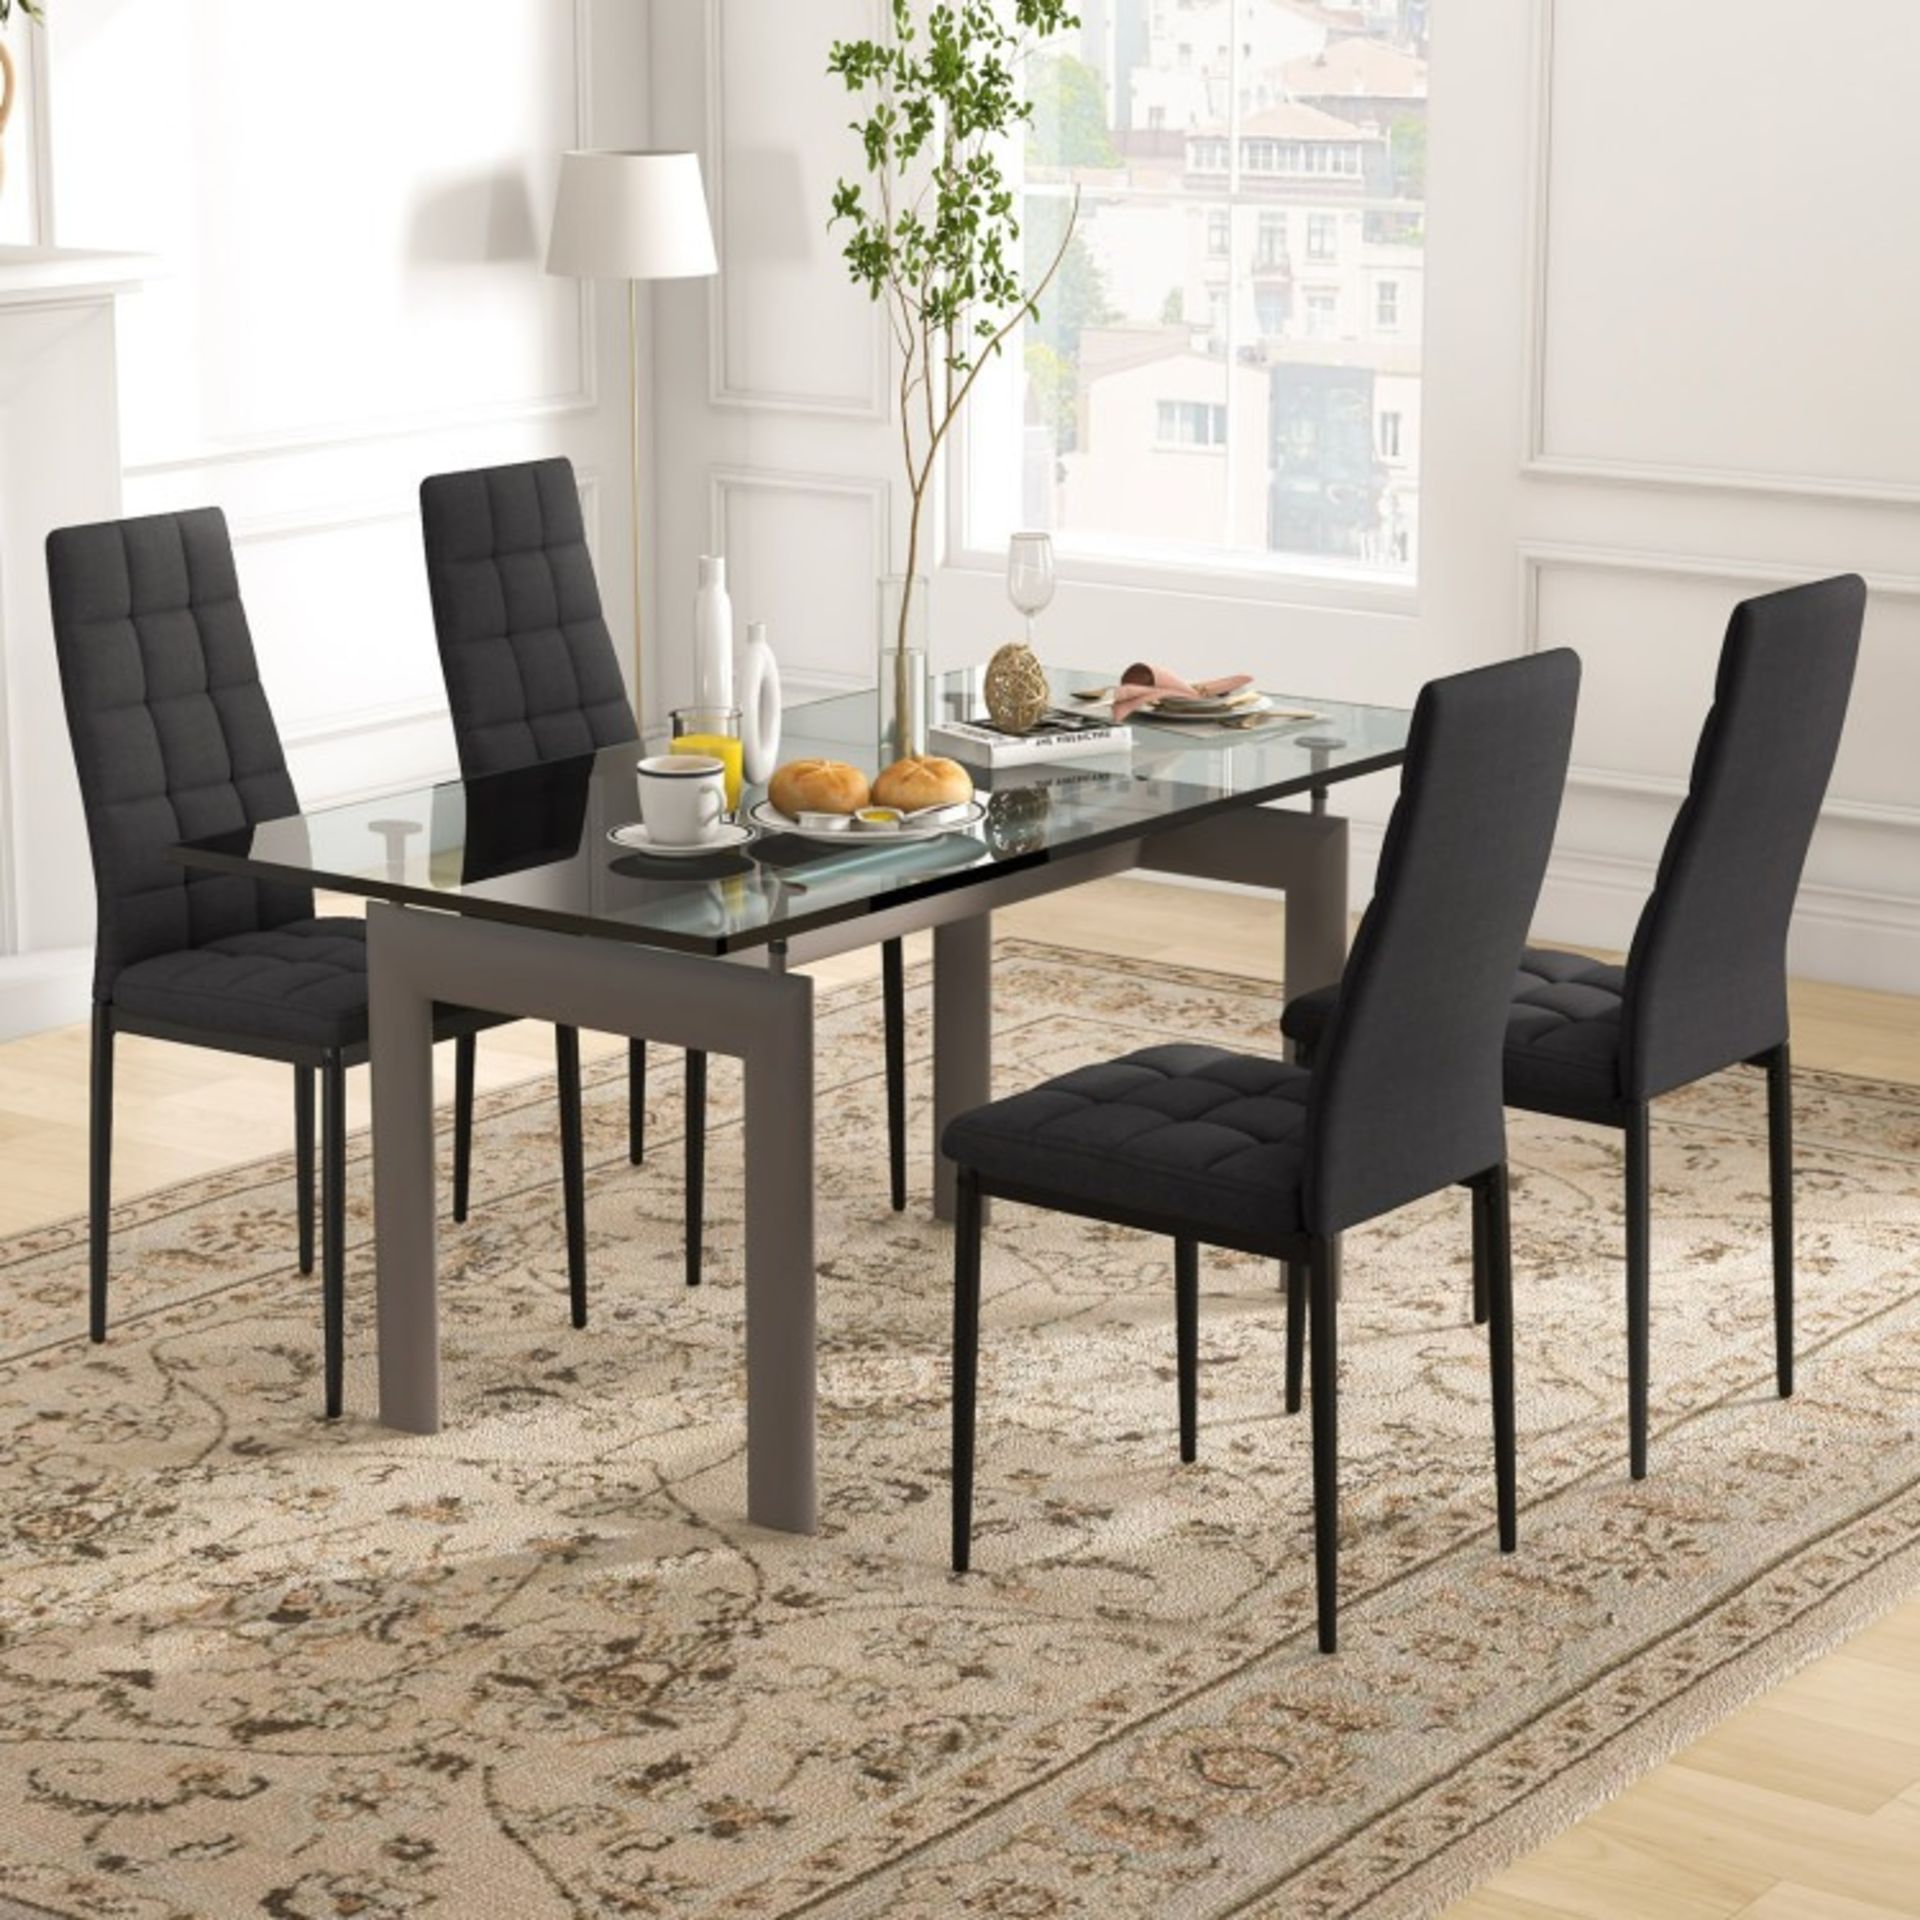 Set of 4 Fabric Dining Chairs Set with Upholstered Cushion - ER53